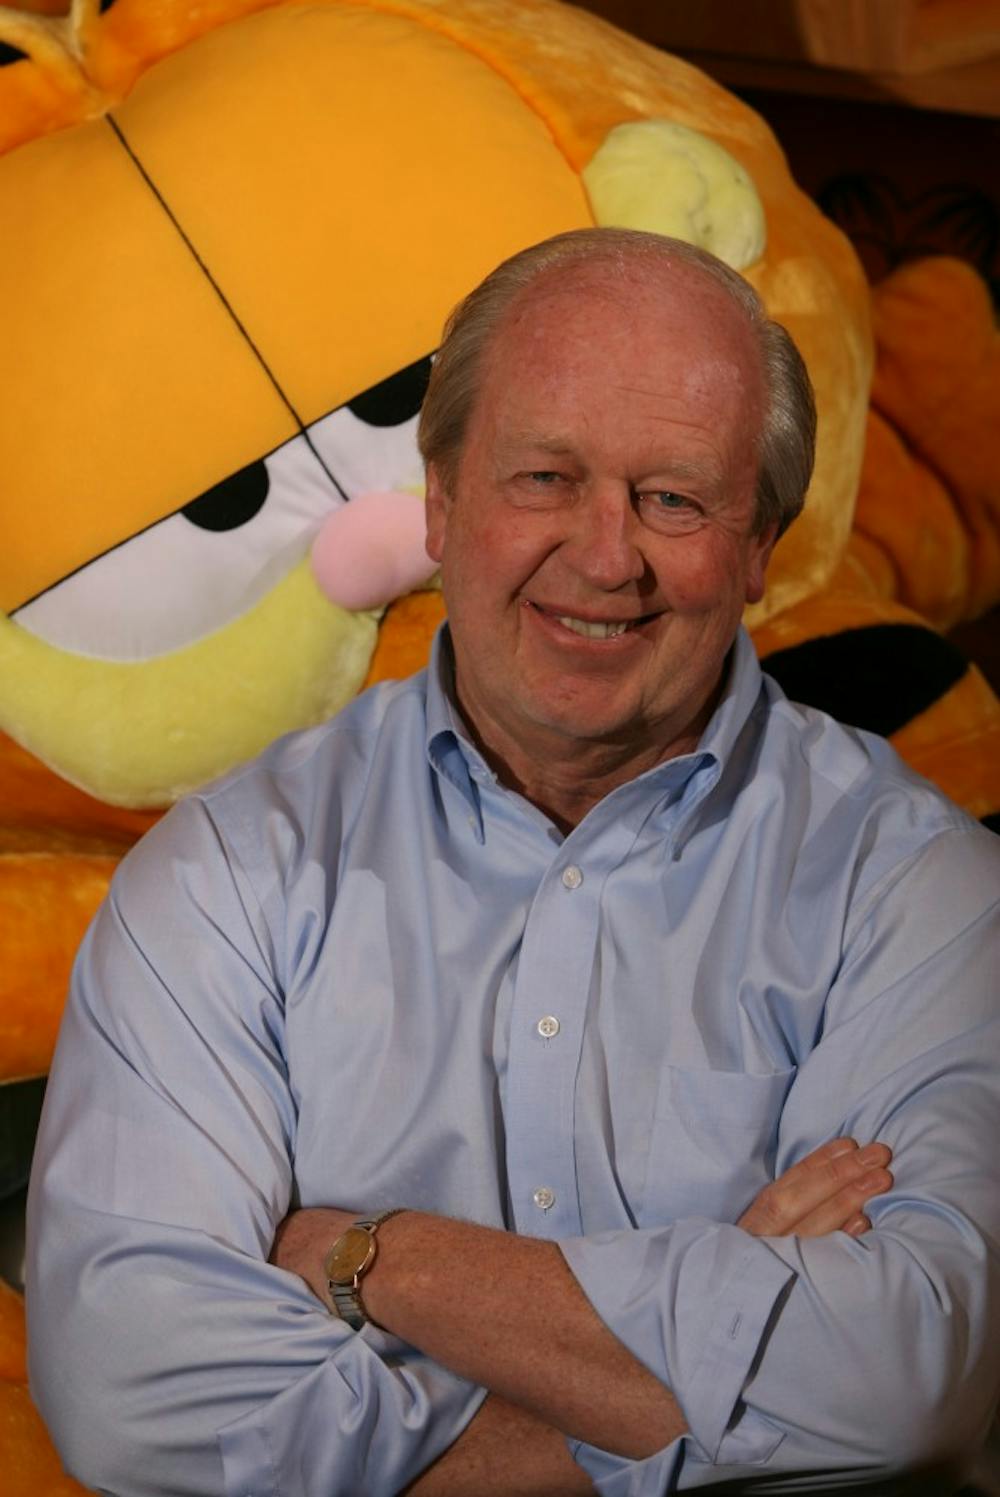 &nbsp;Jim Davis' Garfield the cat has been recognized by different comic strips and television screens since 1978. In 1981, Davis established Paws Inc. to keep his licensing for the famous cat. Photo Courtesy M Magazine, The Star Press.